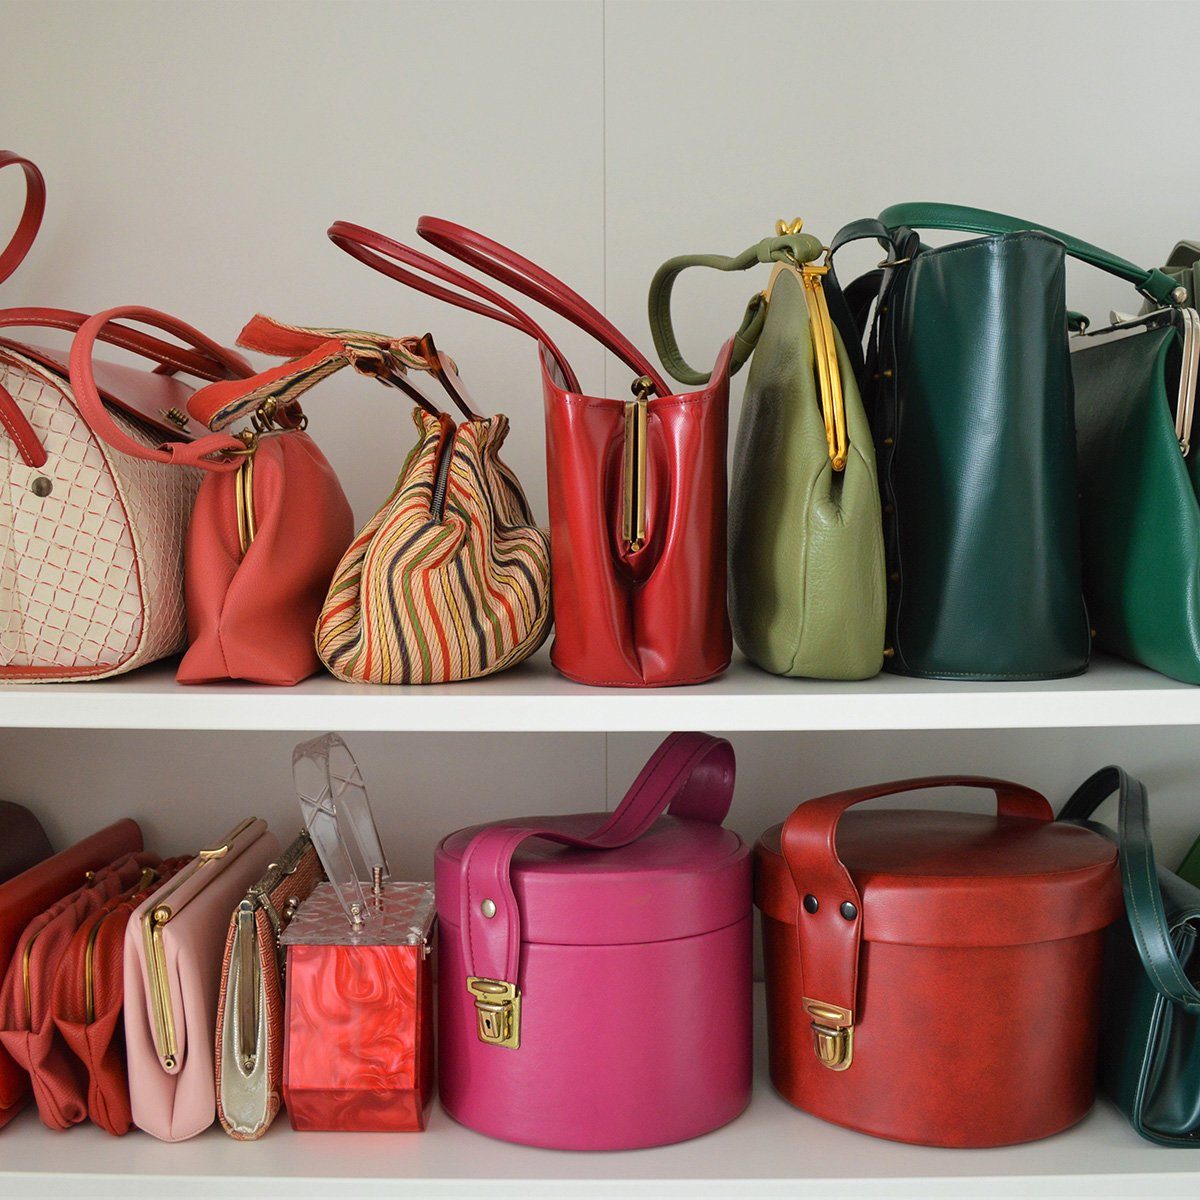 Various purses of all colors on a shelf